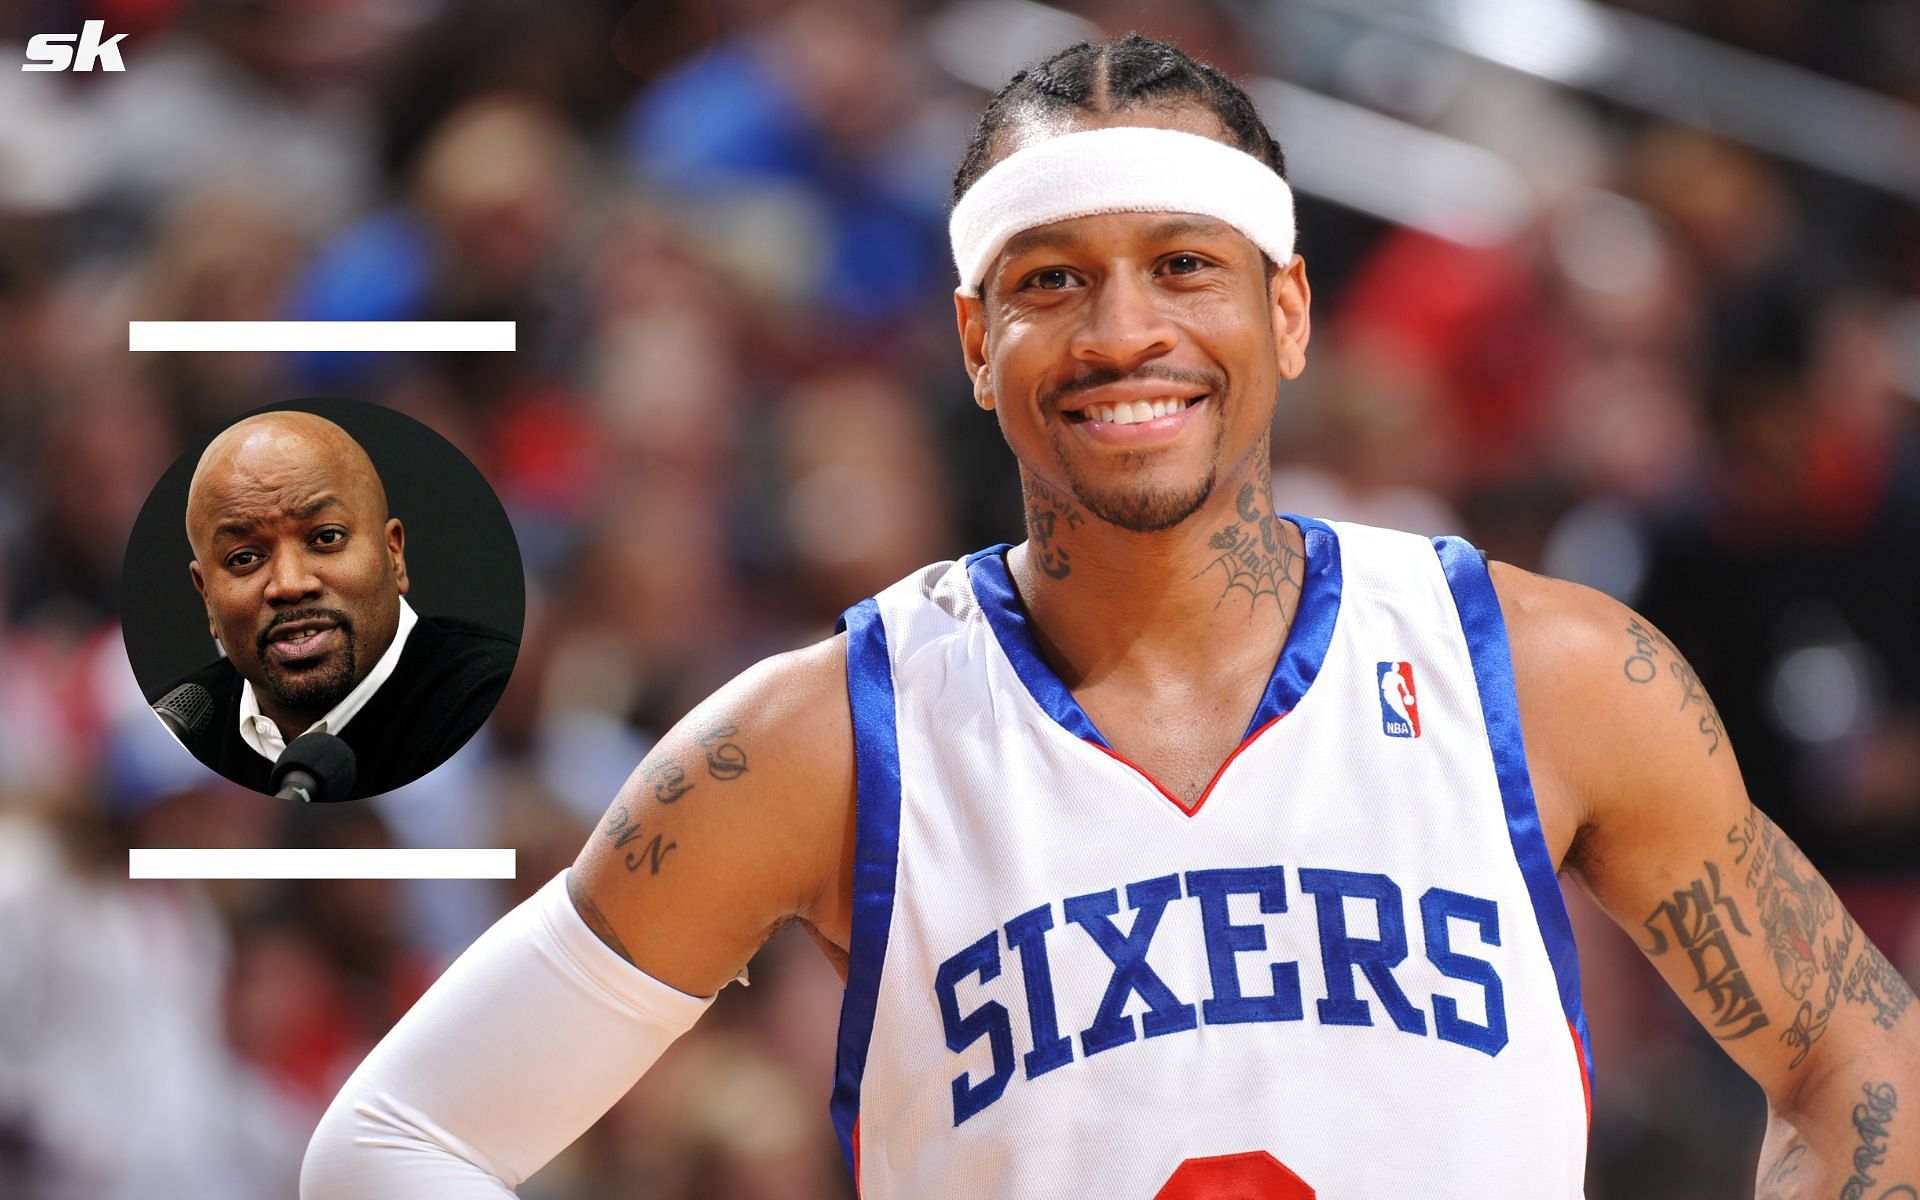 The Philadelphia 76ers nearly traded Allen Iverson to the Detroit Pistons in the summer of 2000.